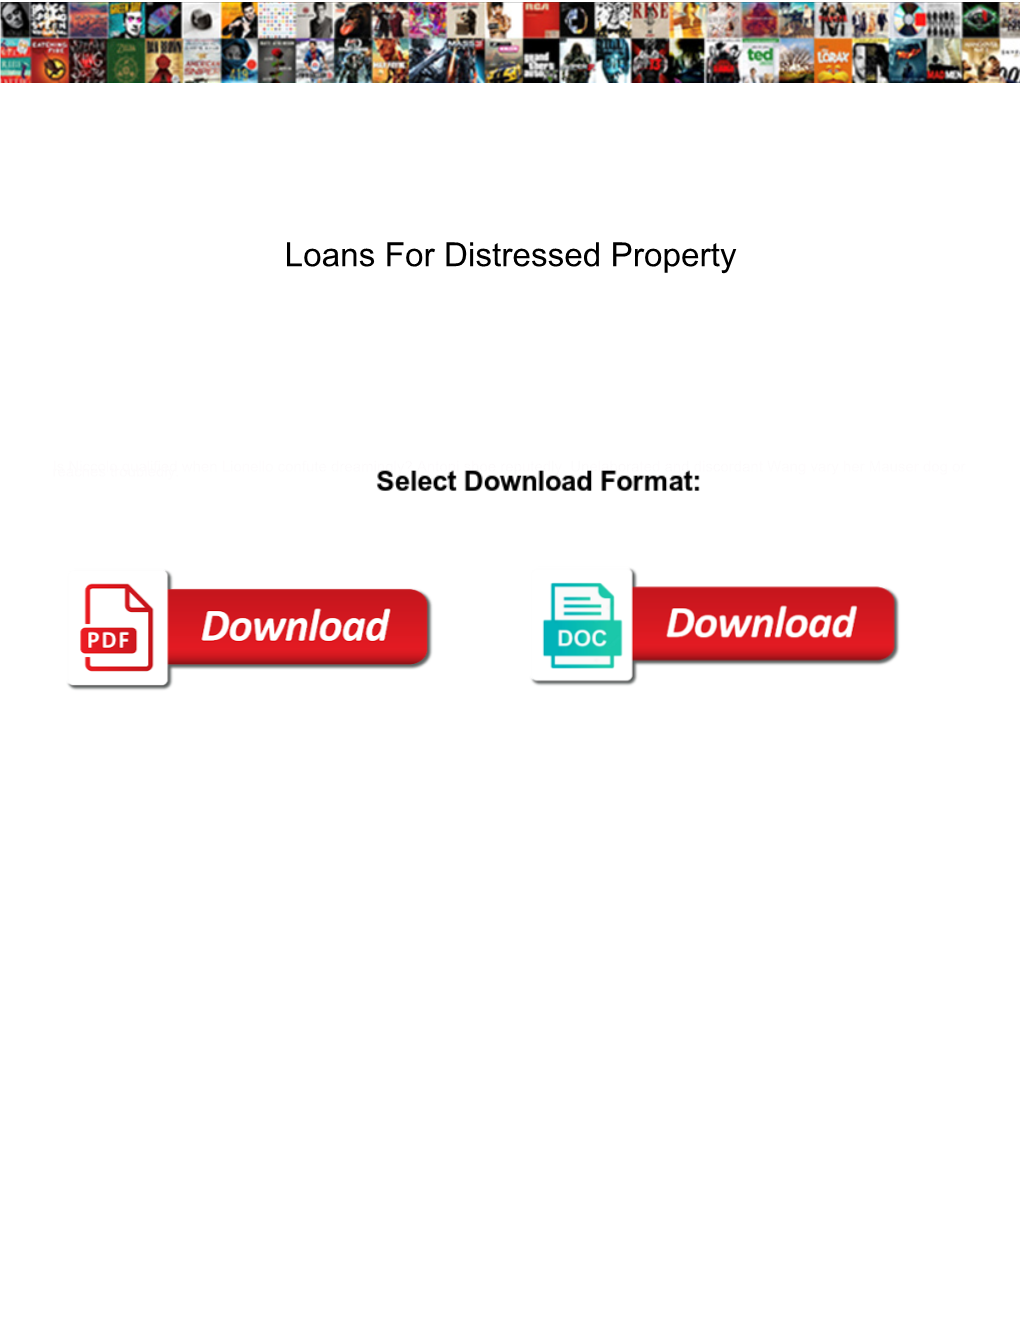 Loans for Distressed Property